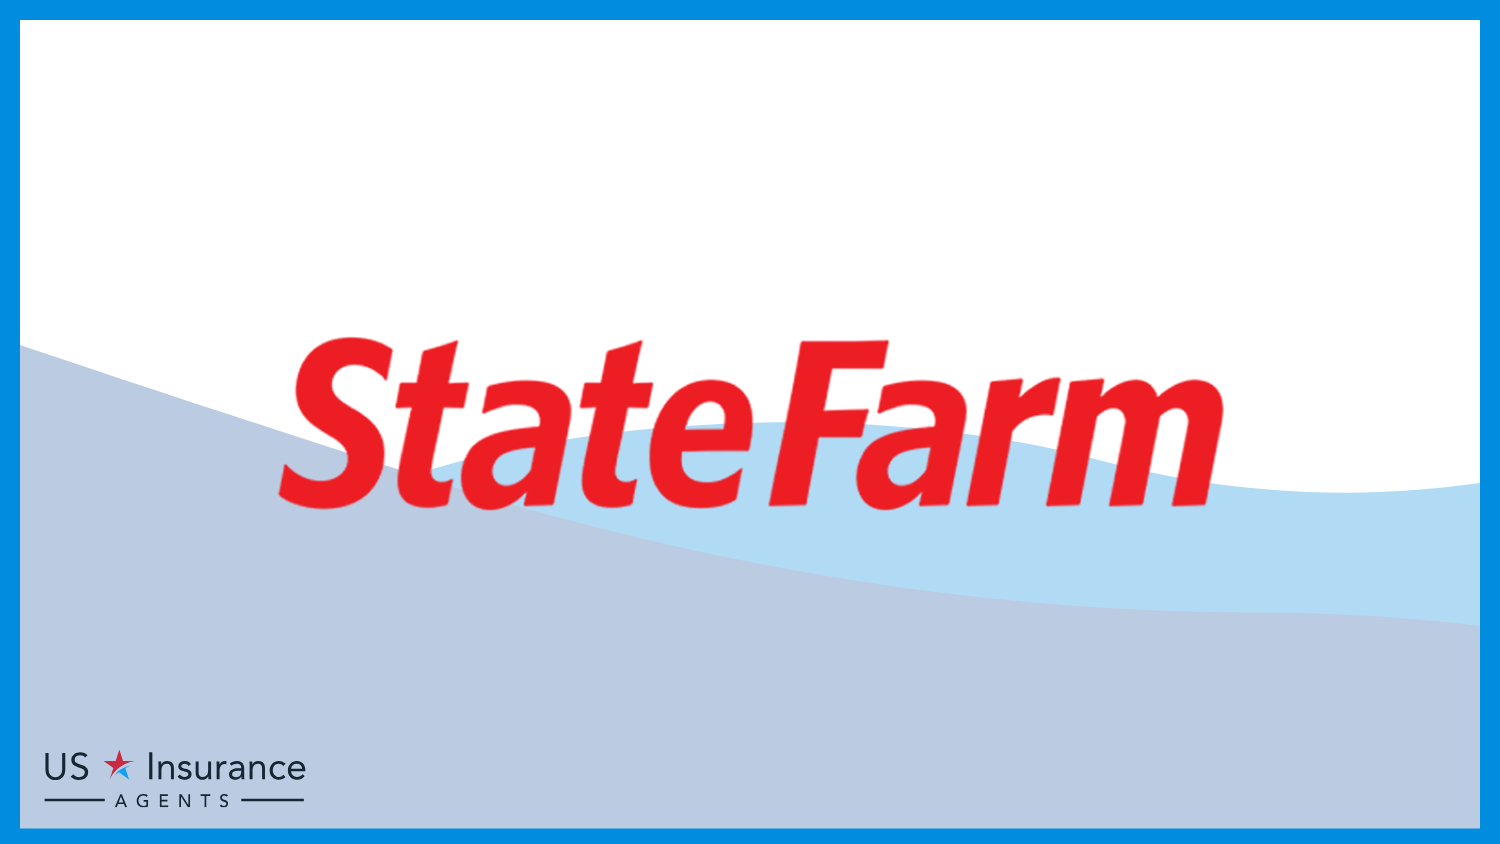 State Farm: Best Life Insurance for Missionaries